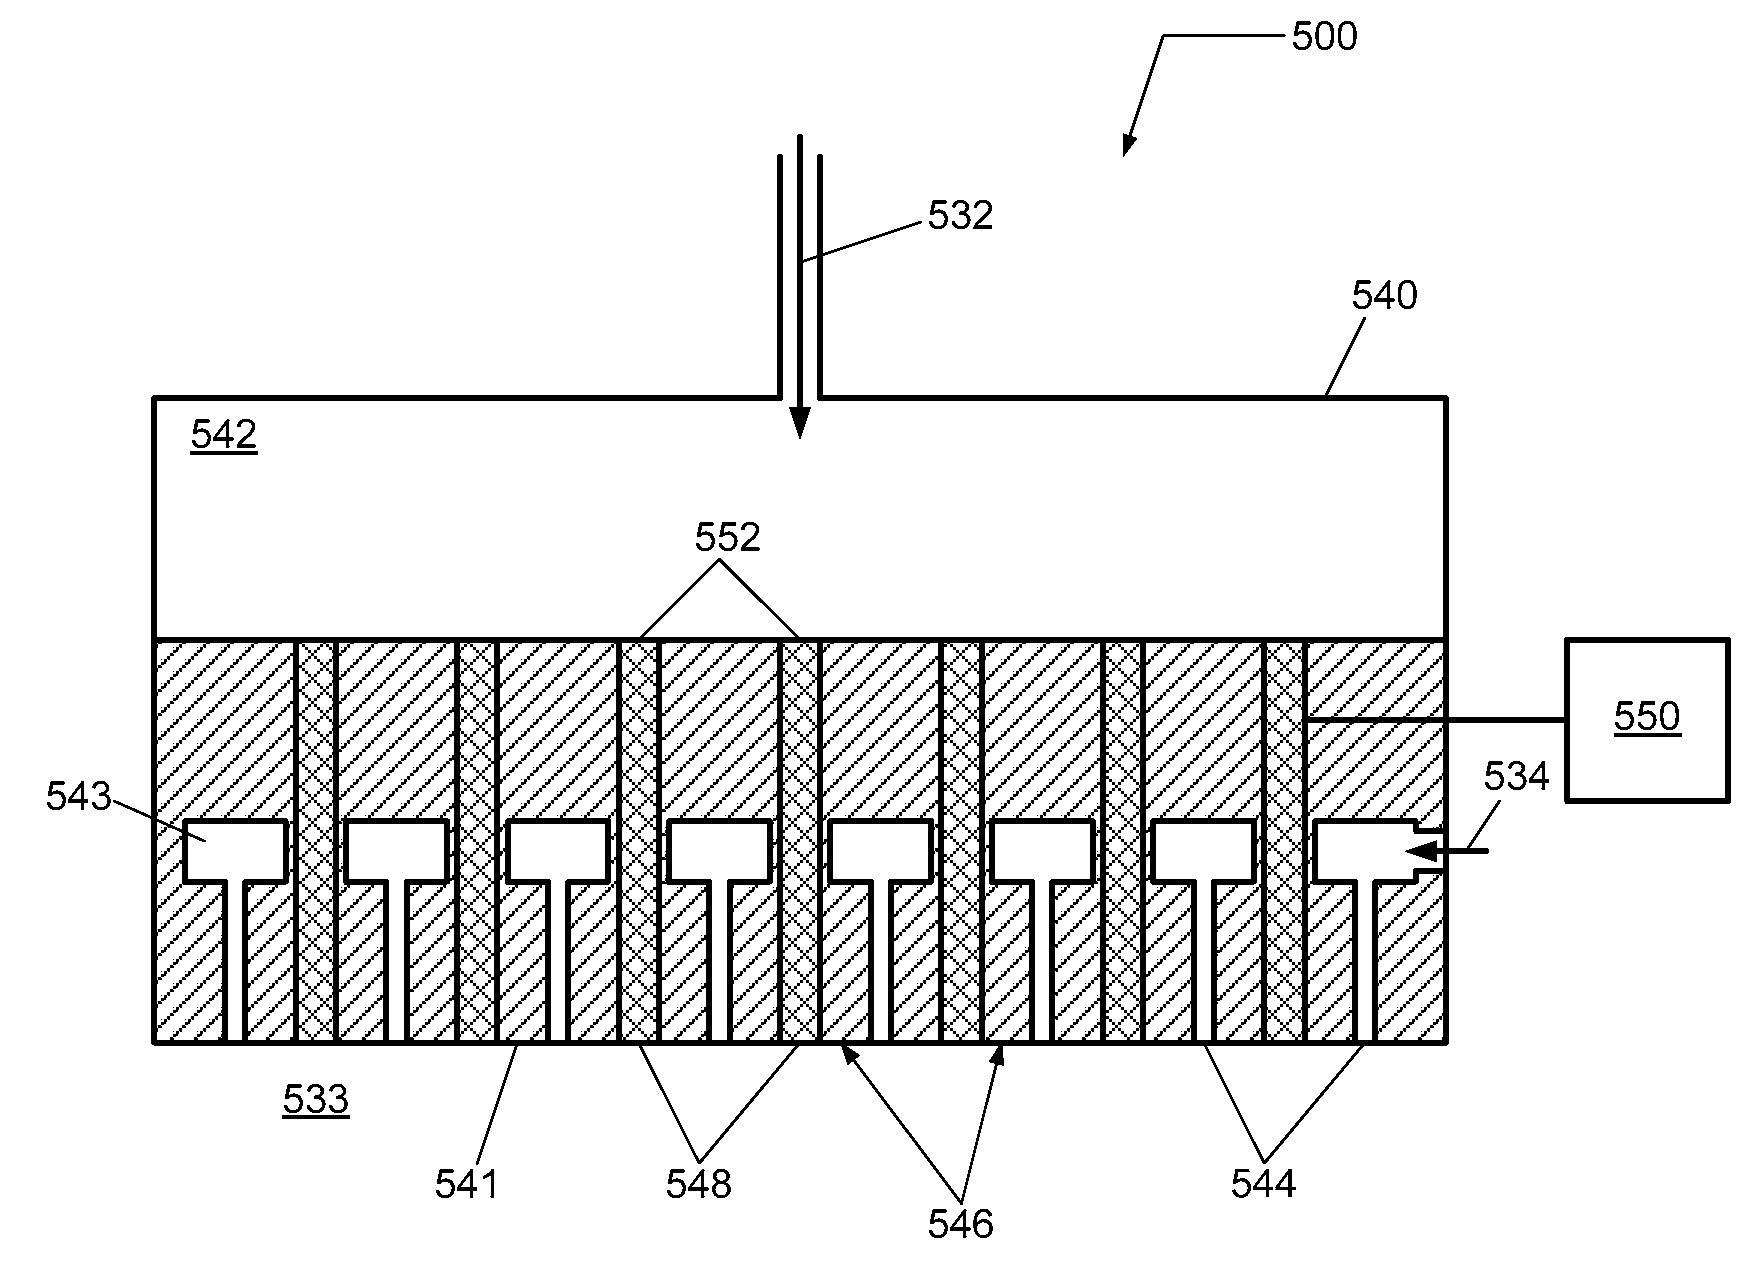 Porous gas heating device for a vapor deposition system